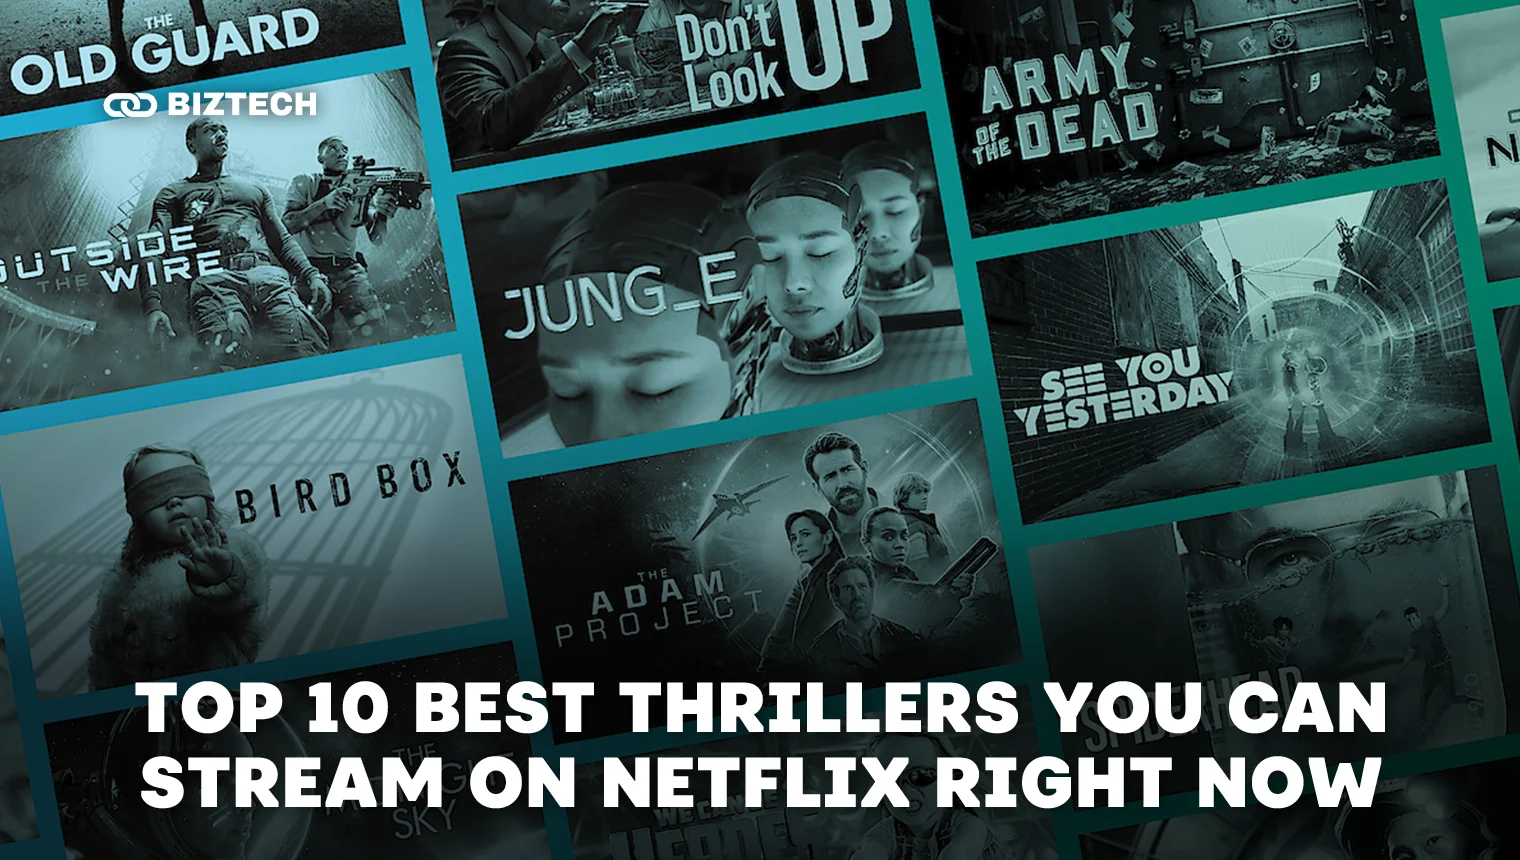 Top 10 Best Thrillers You Can Stream on Netflix Right Now